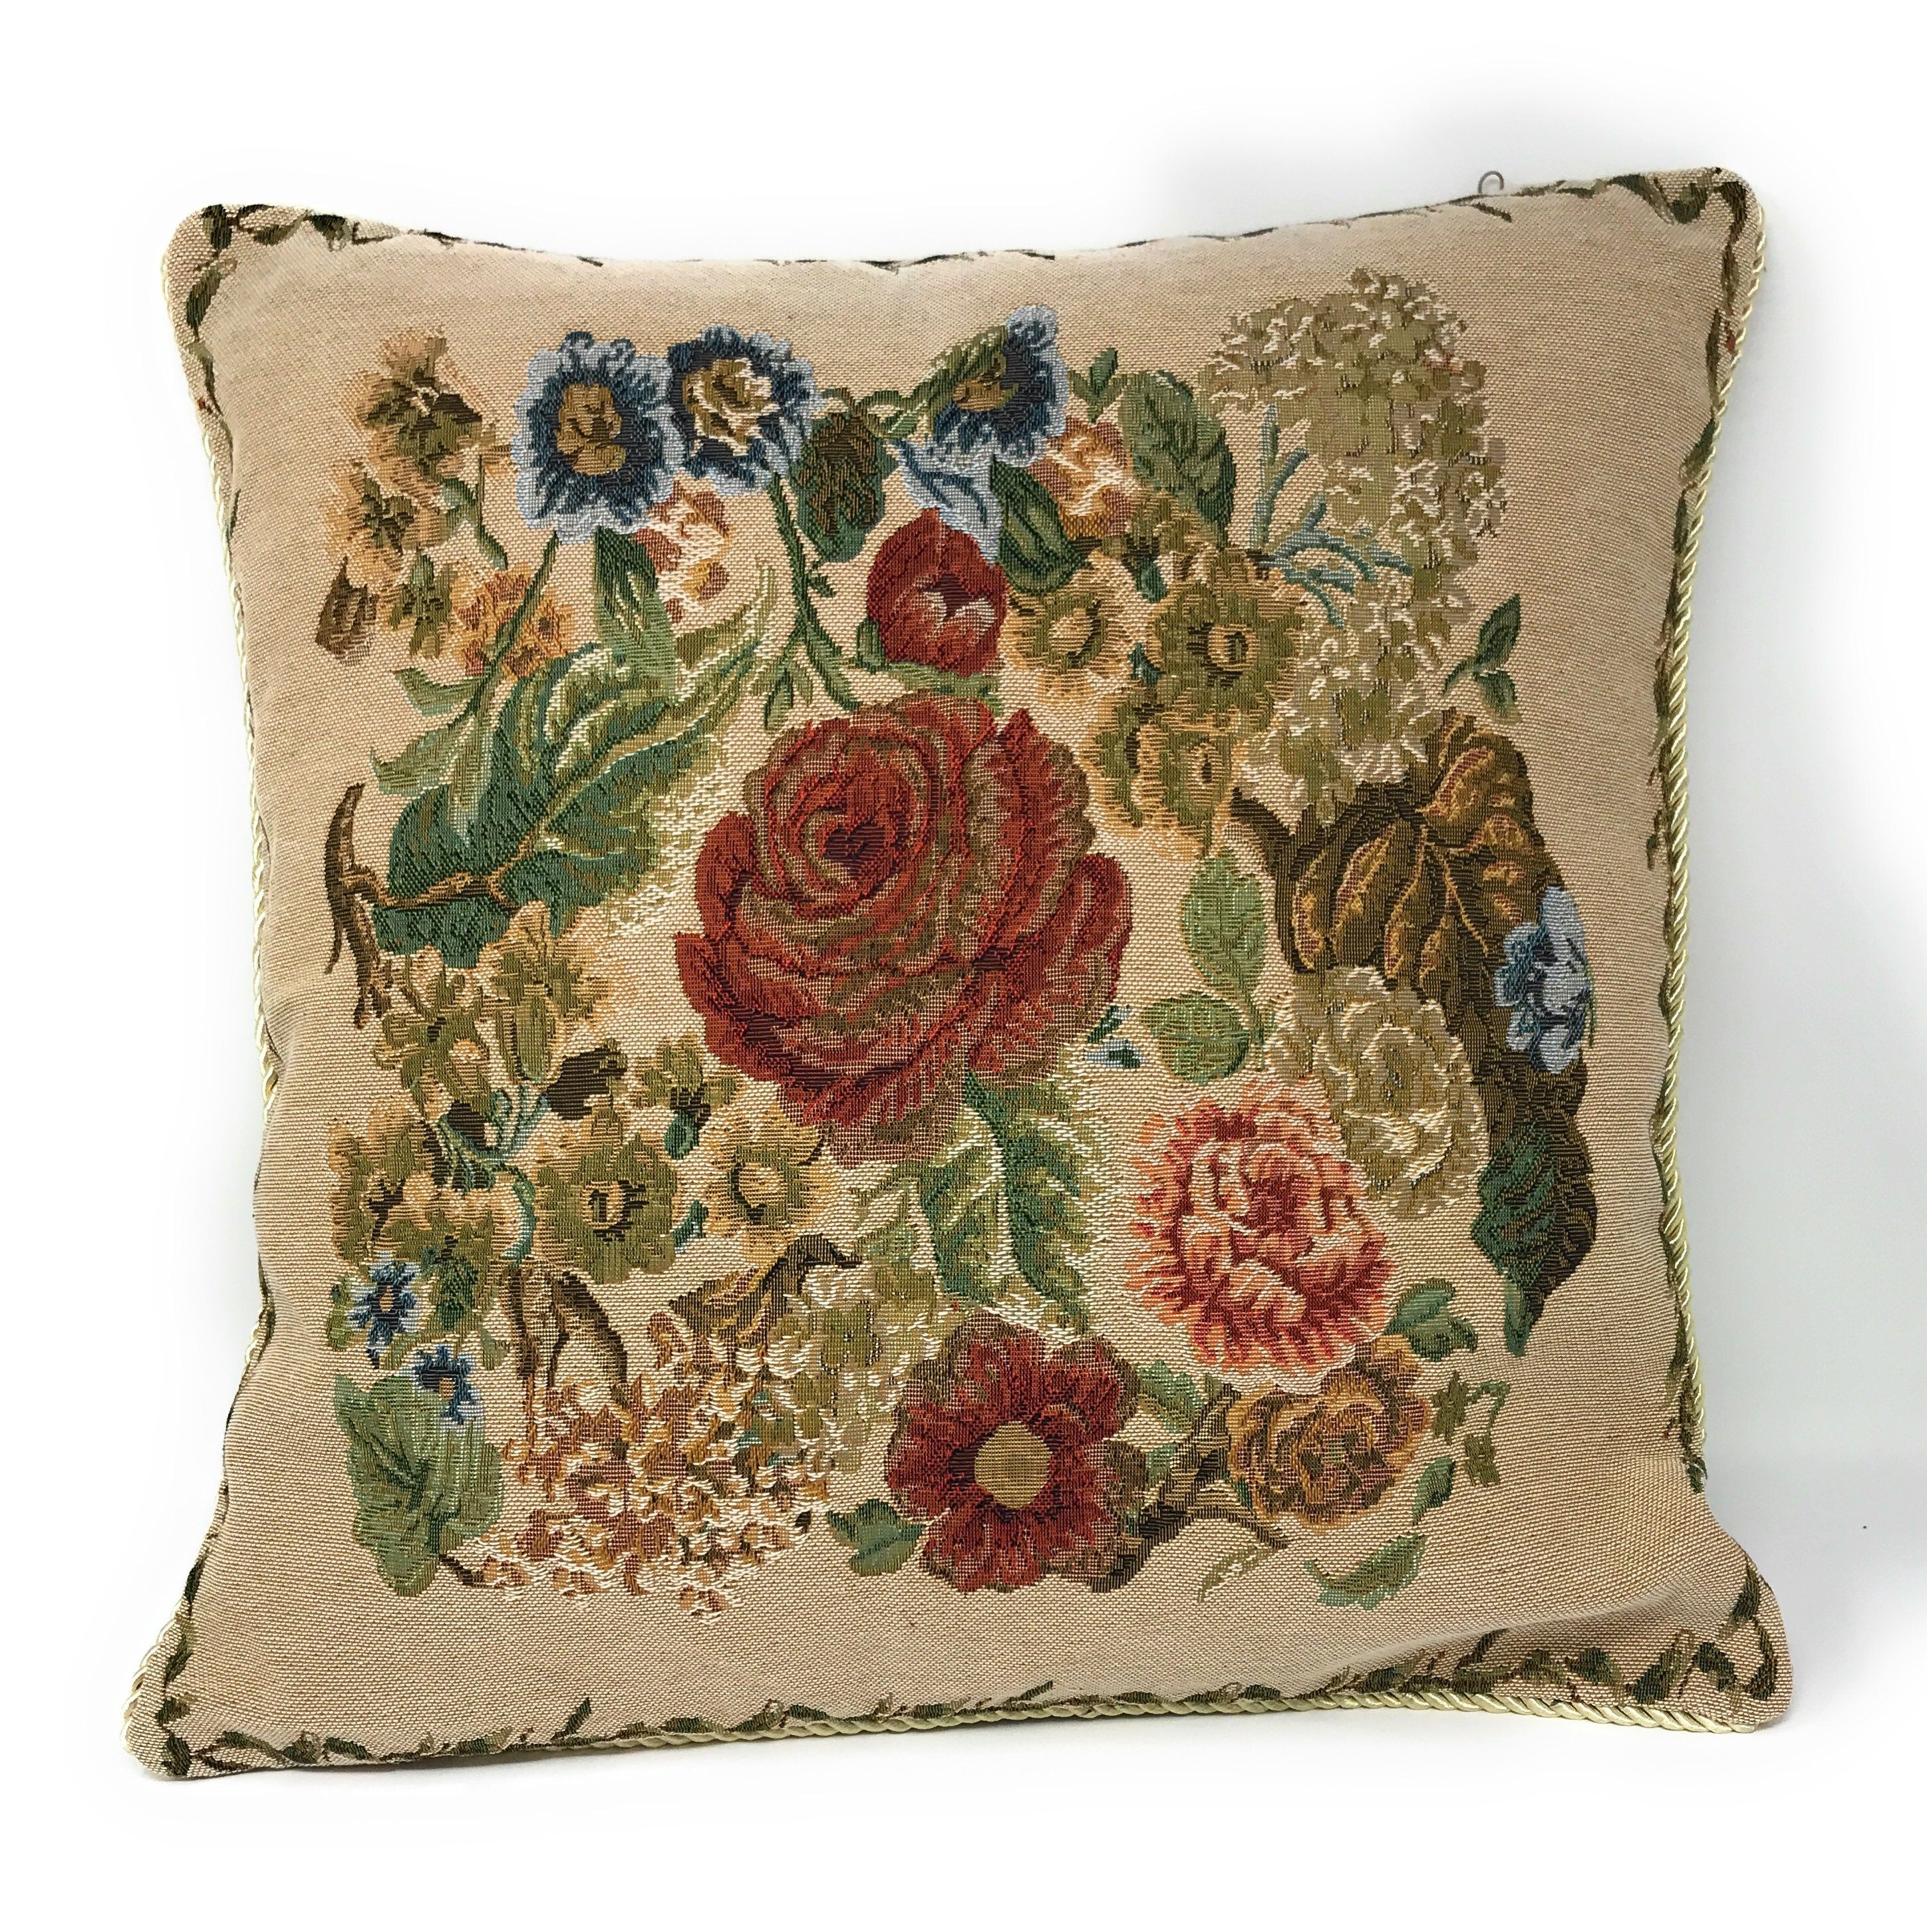 Tache Floral Country Rustic Morning Meadow Tapestry Throw Pillow Cover (3098) - Tache Home Fashion